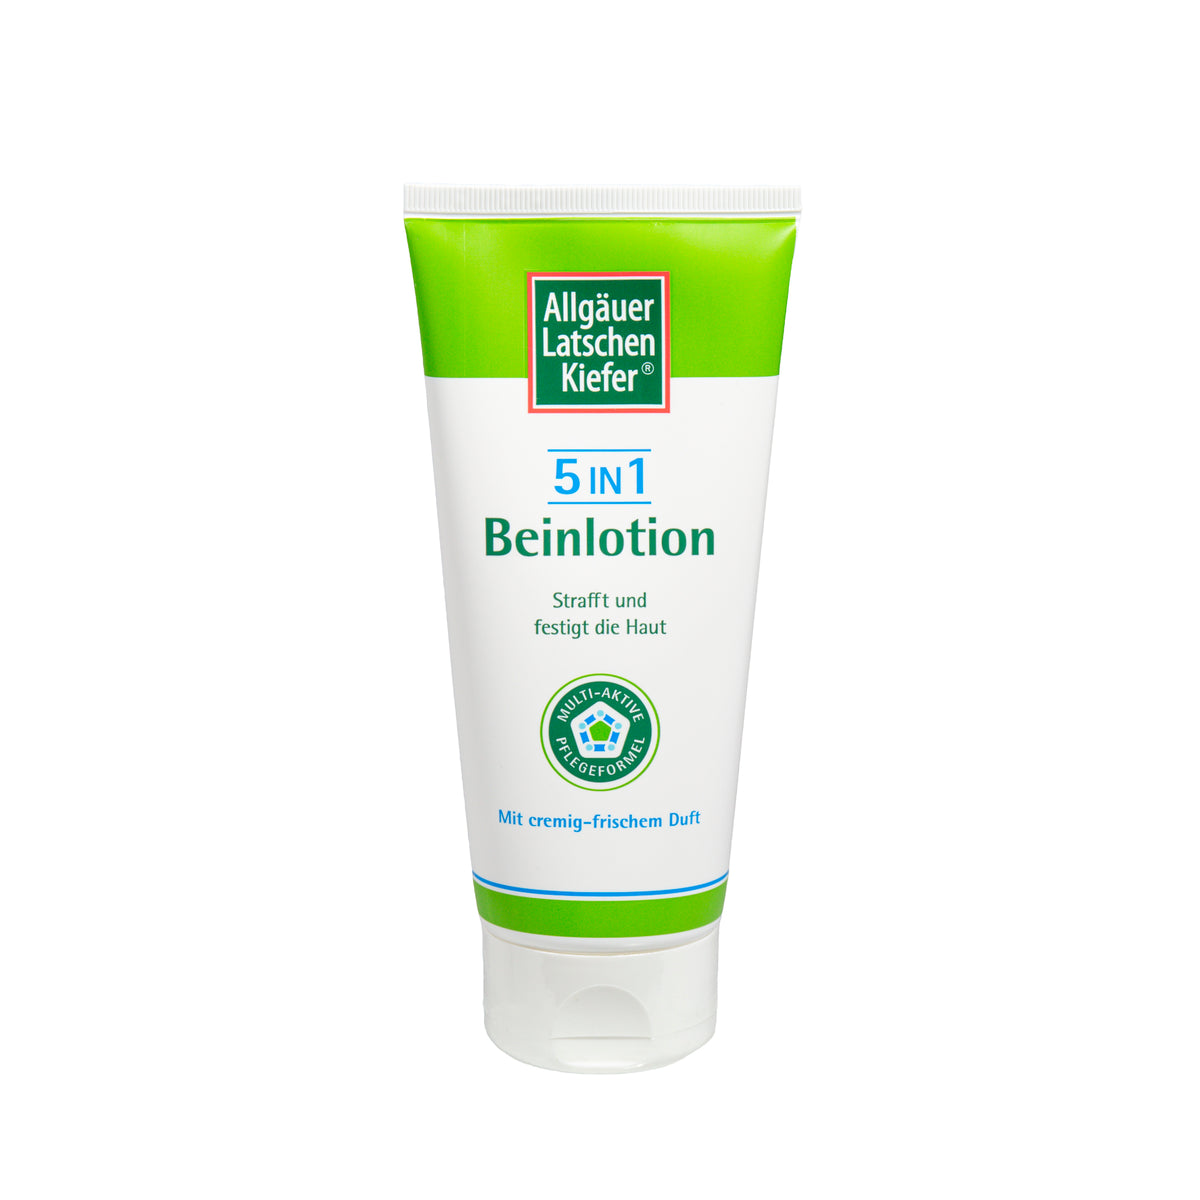 Primary Image of 5 in 1 Beinlotion